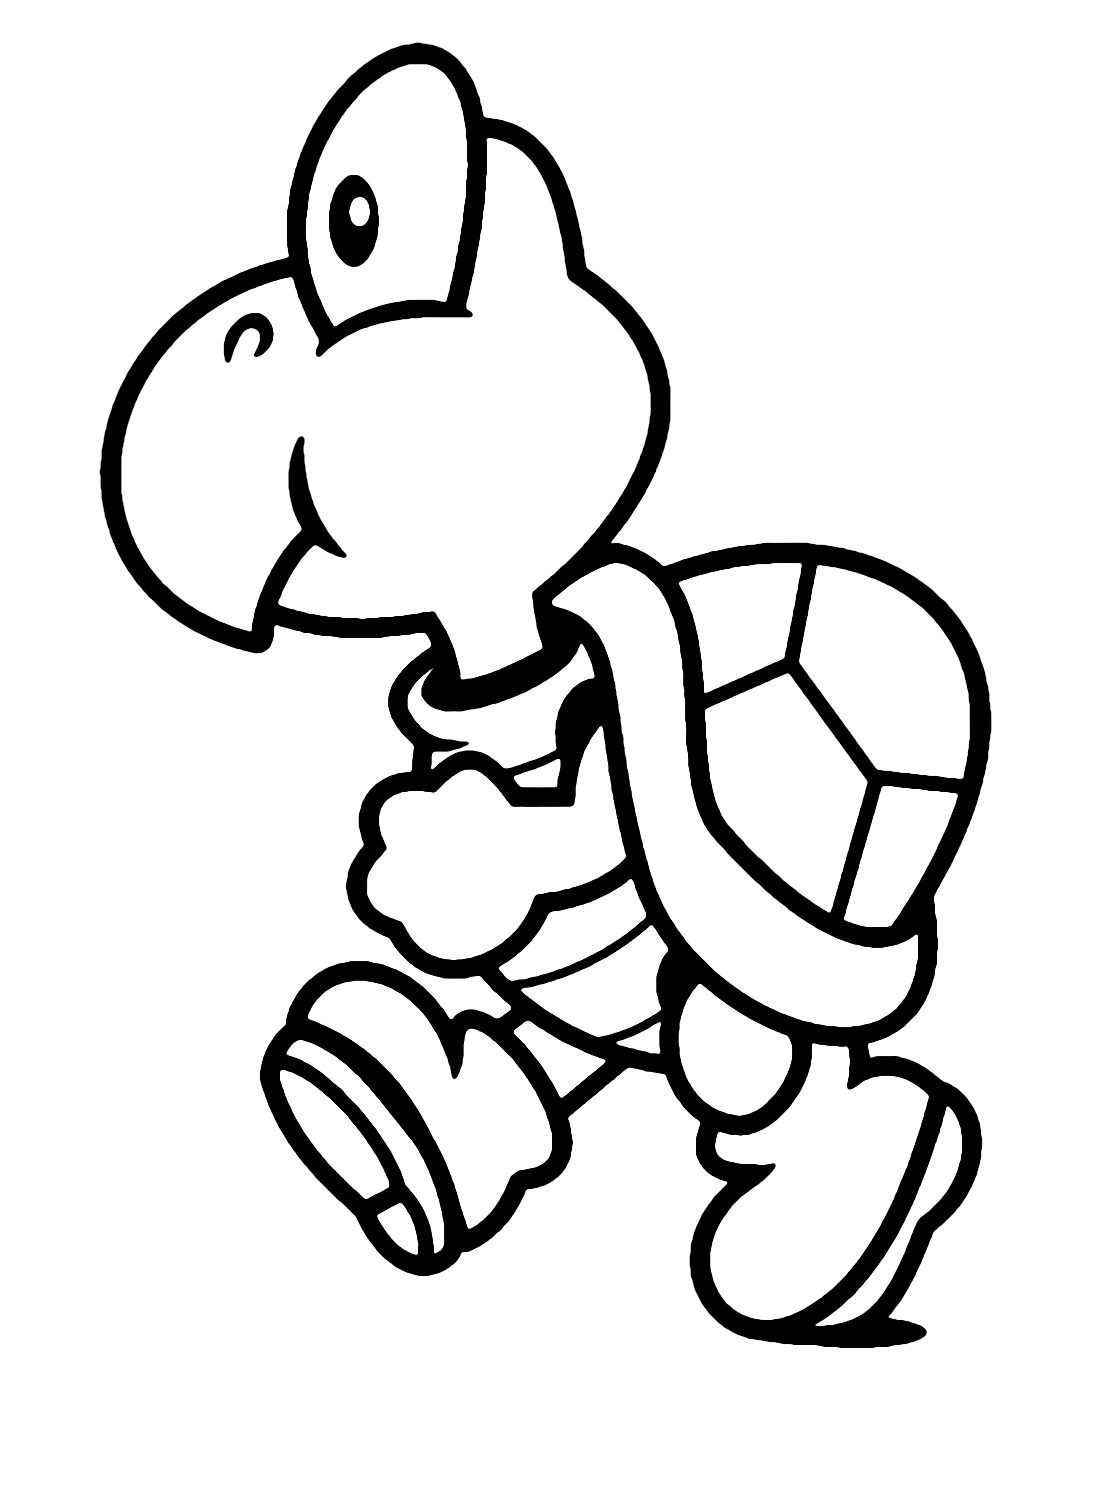 Koopa troopa coloring pages printable for free download